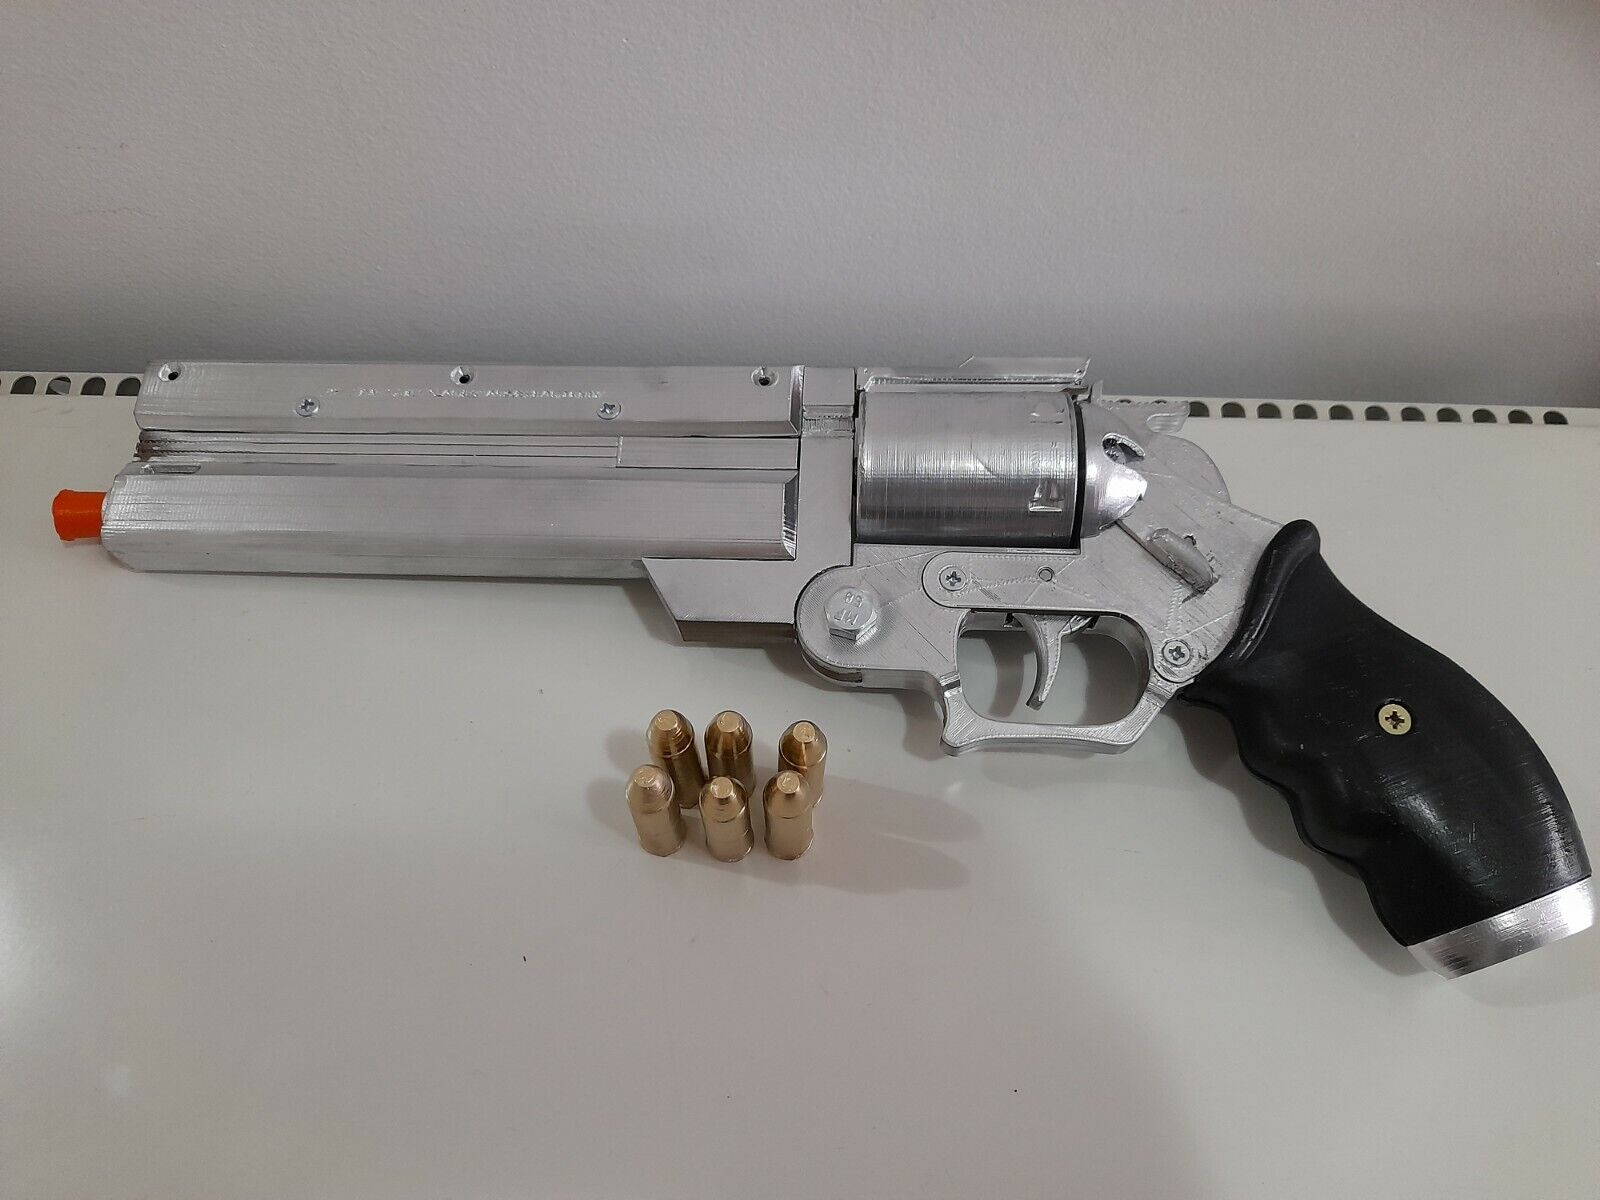 Vash The Stampede revolver from Trigun Series - NOT A REAL GUN